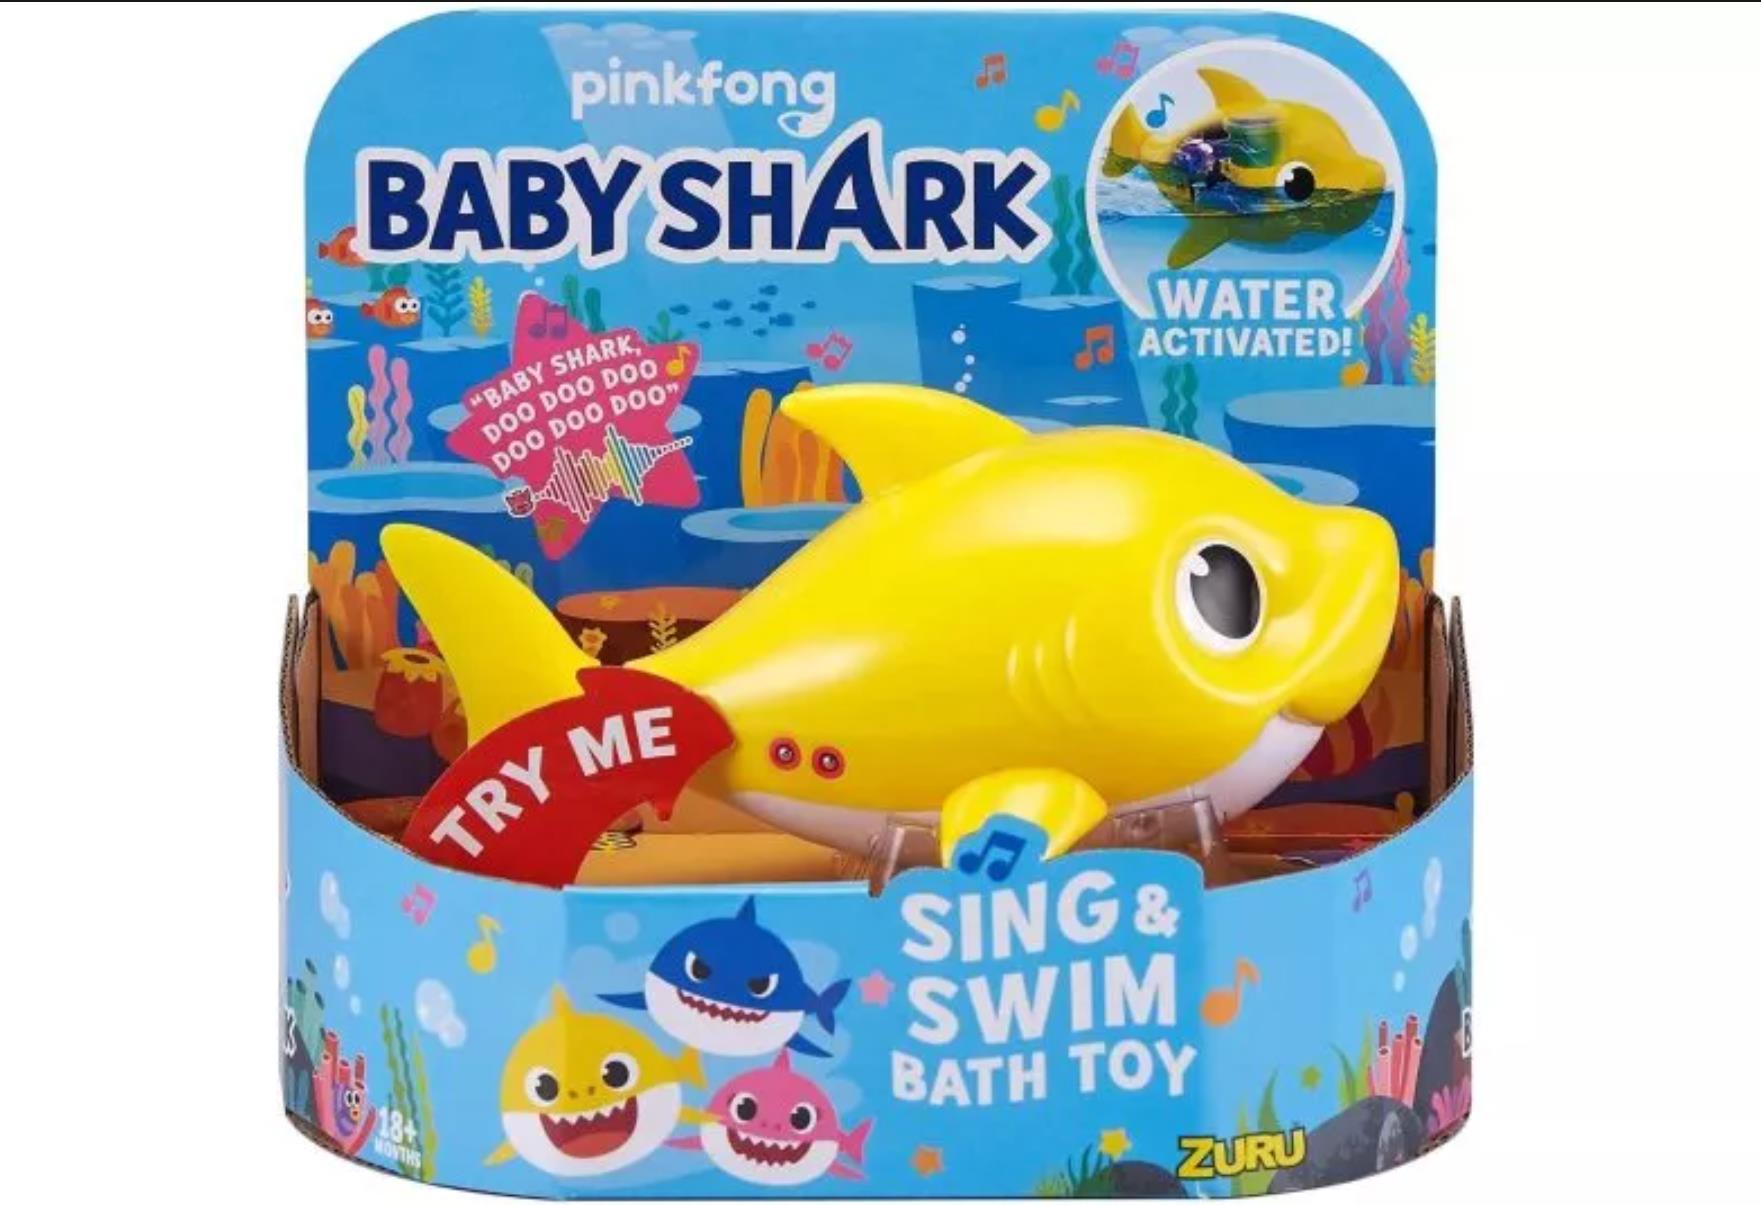 Millions of Baby Shark Toys Recalled After Children Impaled